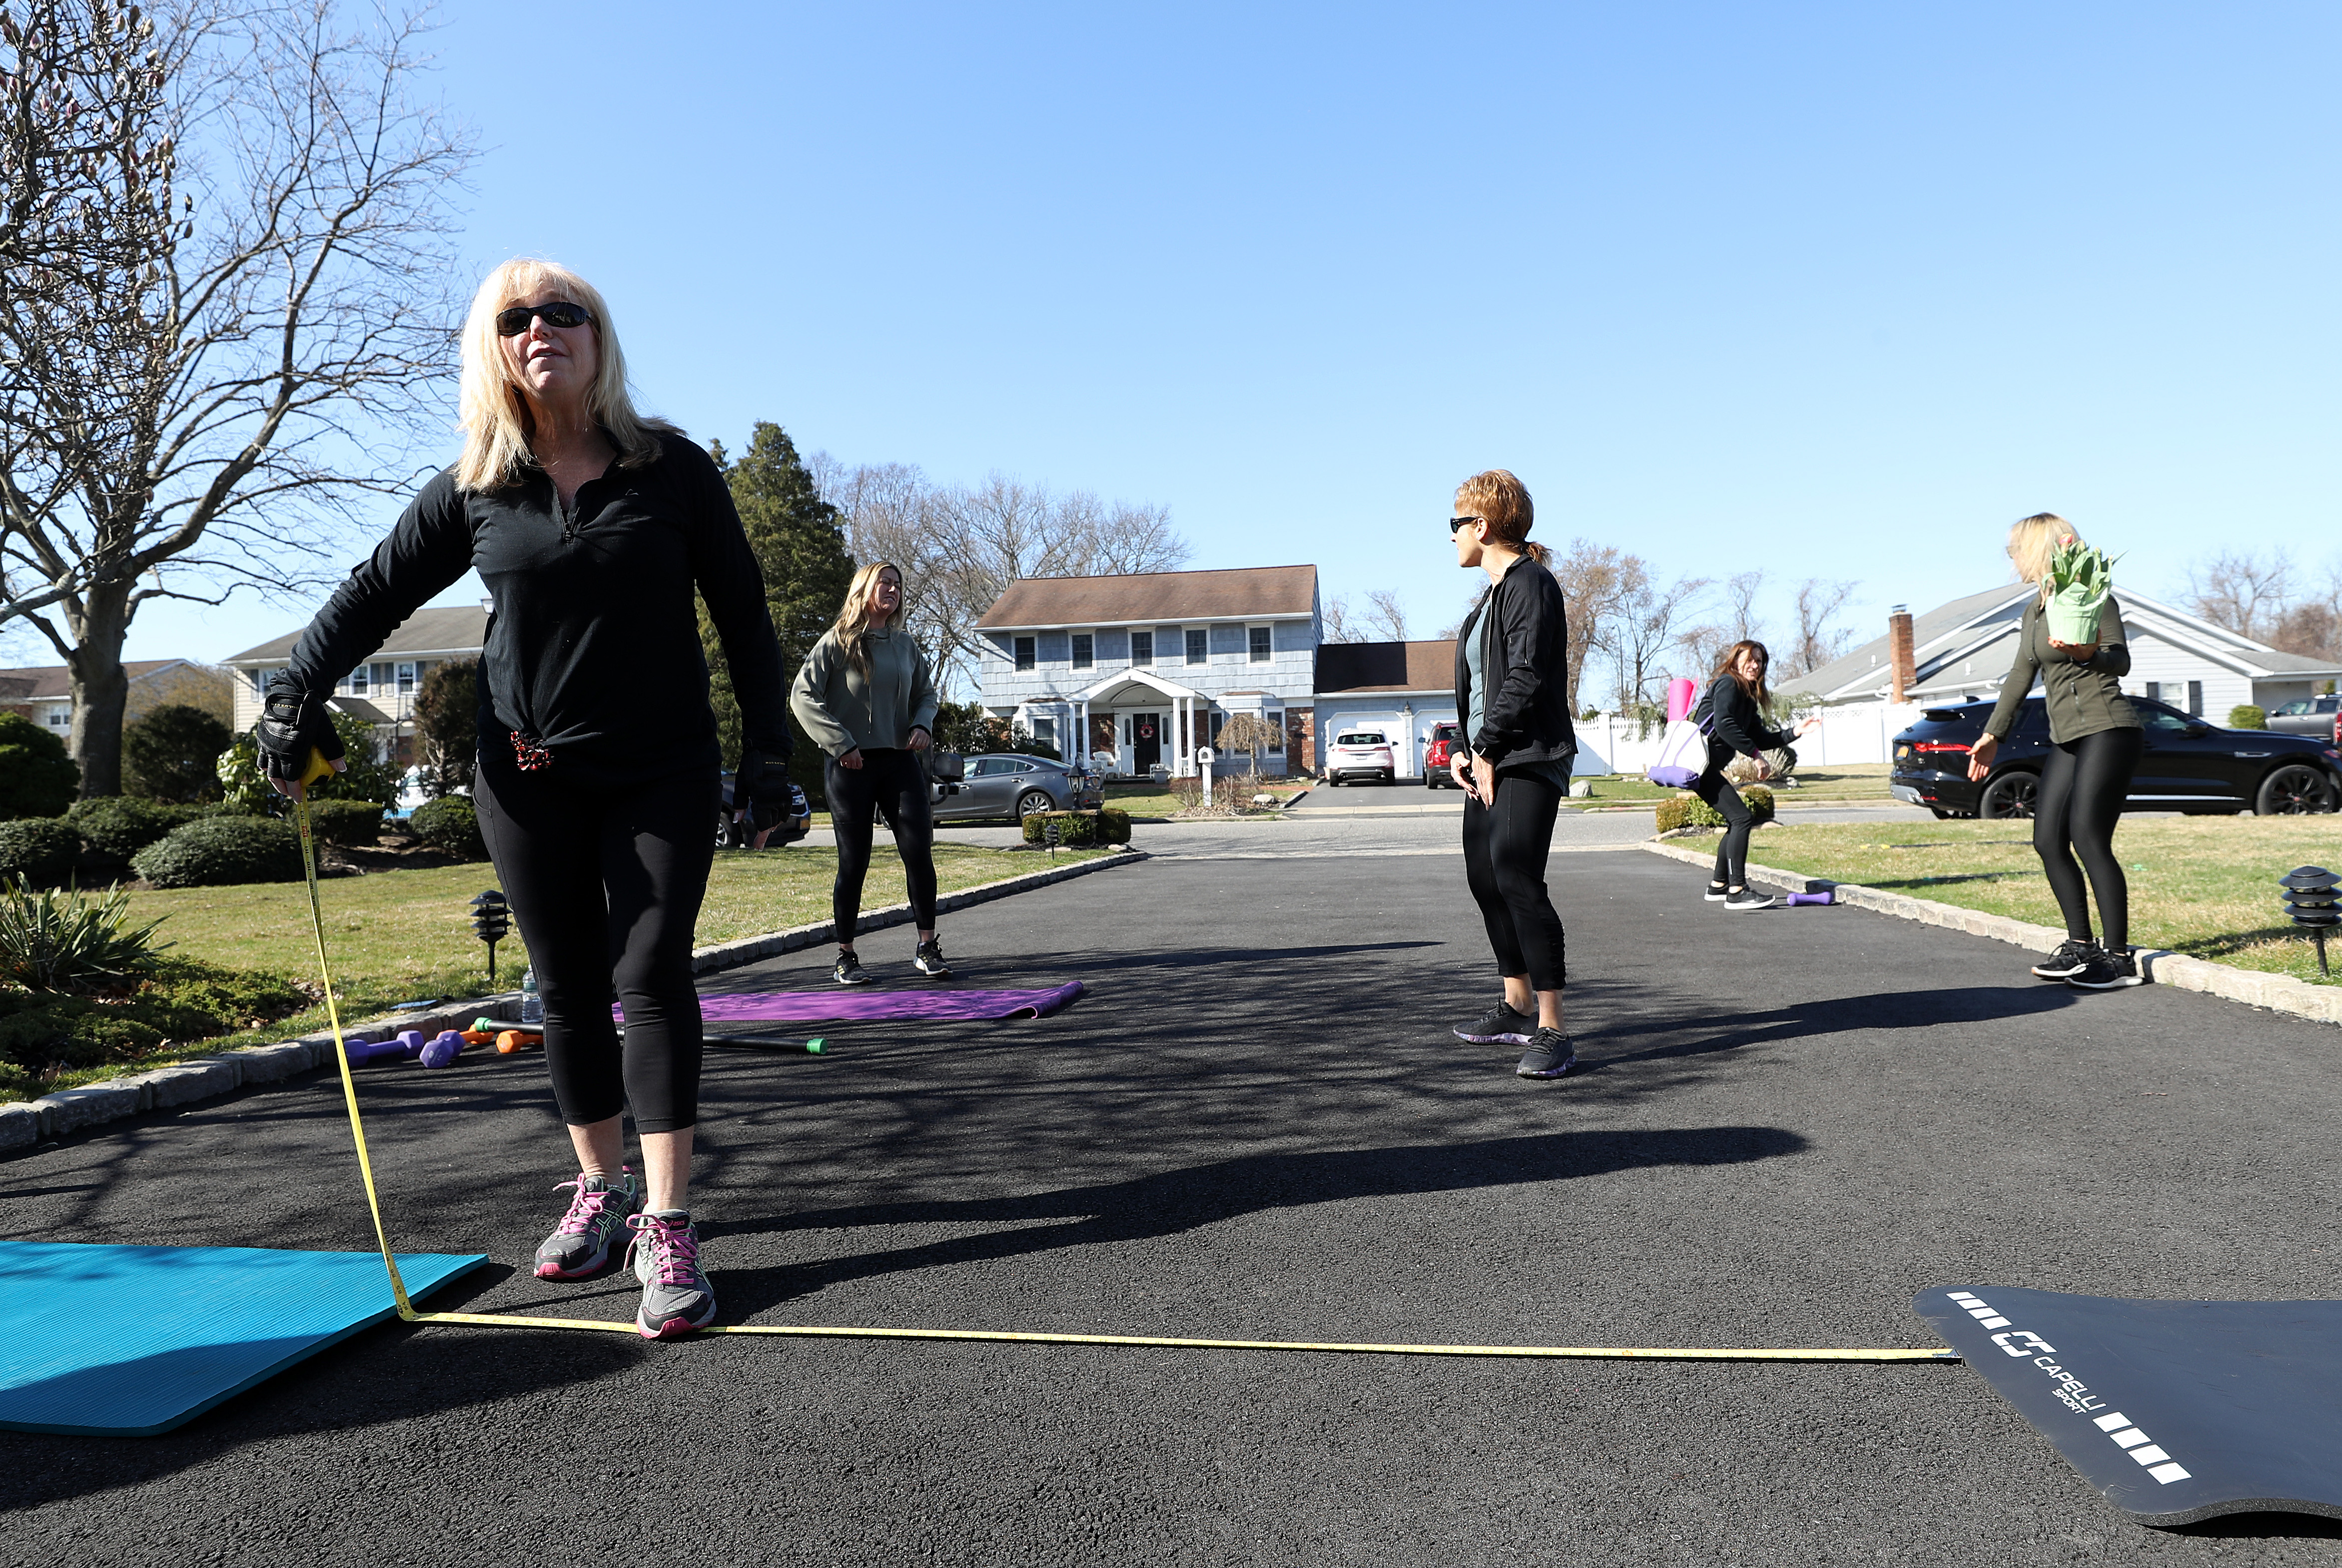 Veronica King of Sayville measures a distance of seven feet between mats prior to an outdoor class run by Fitness Instructor Jamie Benedik in the driveway of her home on March 26, 2020 in West Islip, New York. (Al Bello/Getty Images)